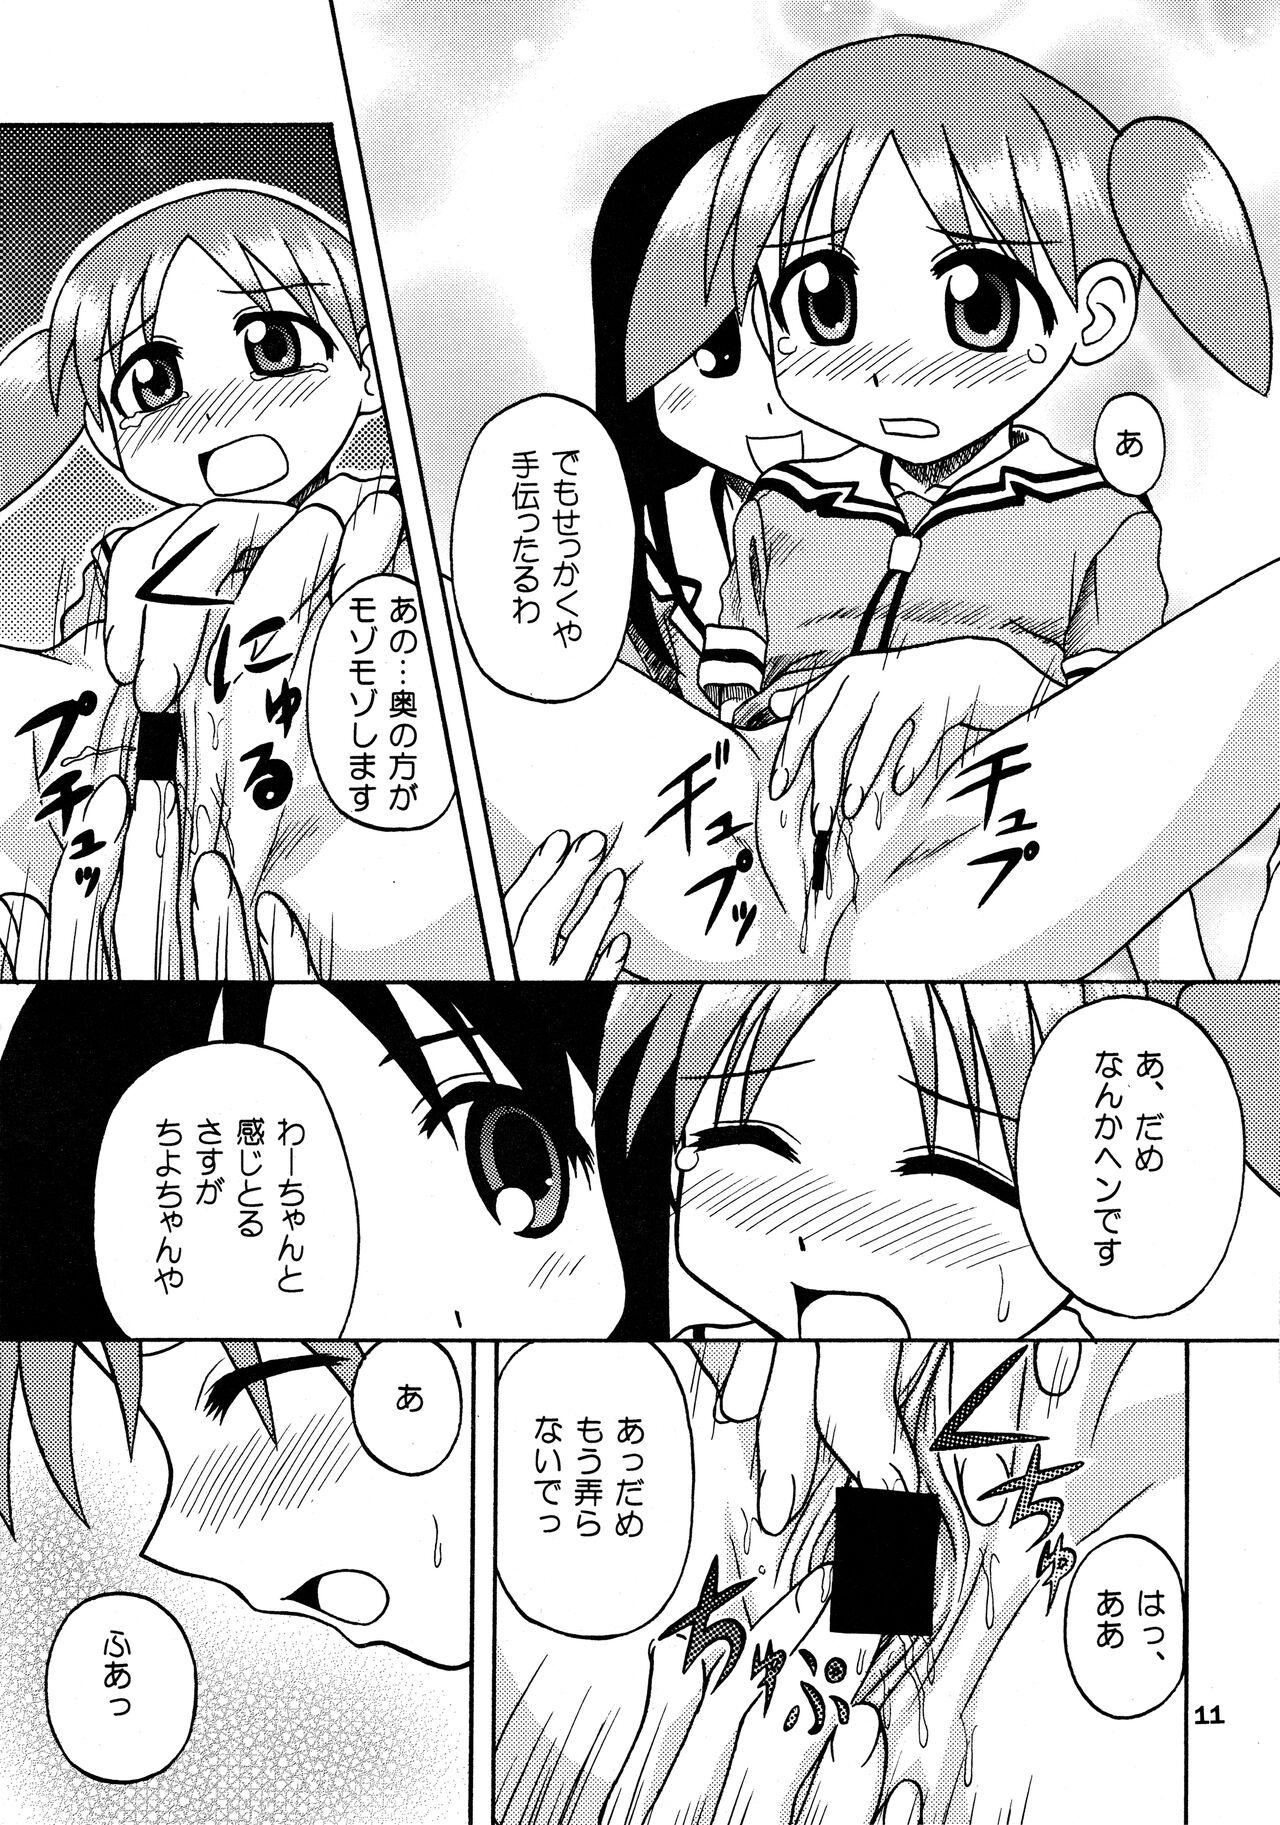 Hood ANOTHER LIFE - Azumanga daioh Pack - Page 11